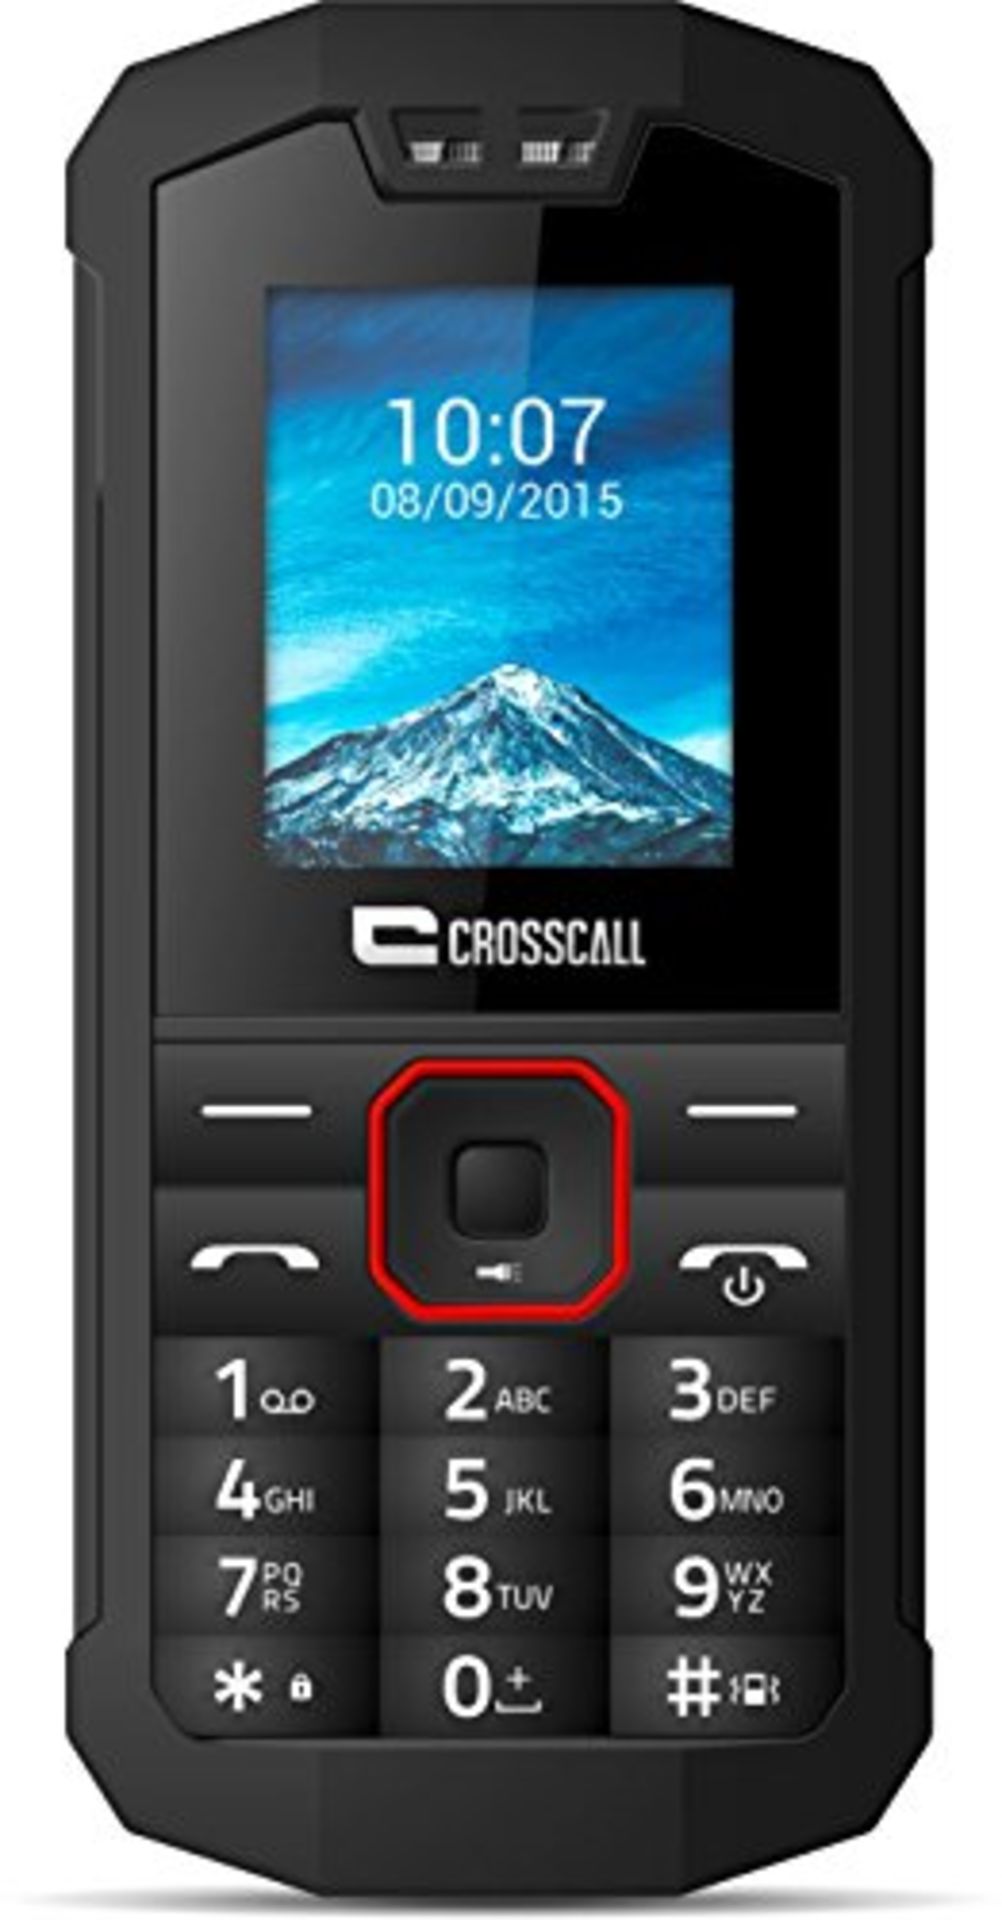 RRP £53.00 Crosscall Spider-X1 Mobile Phone 2G (Screen: 1.77 inches - 32 MB ROM - Dual SIM) Black